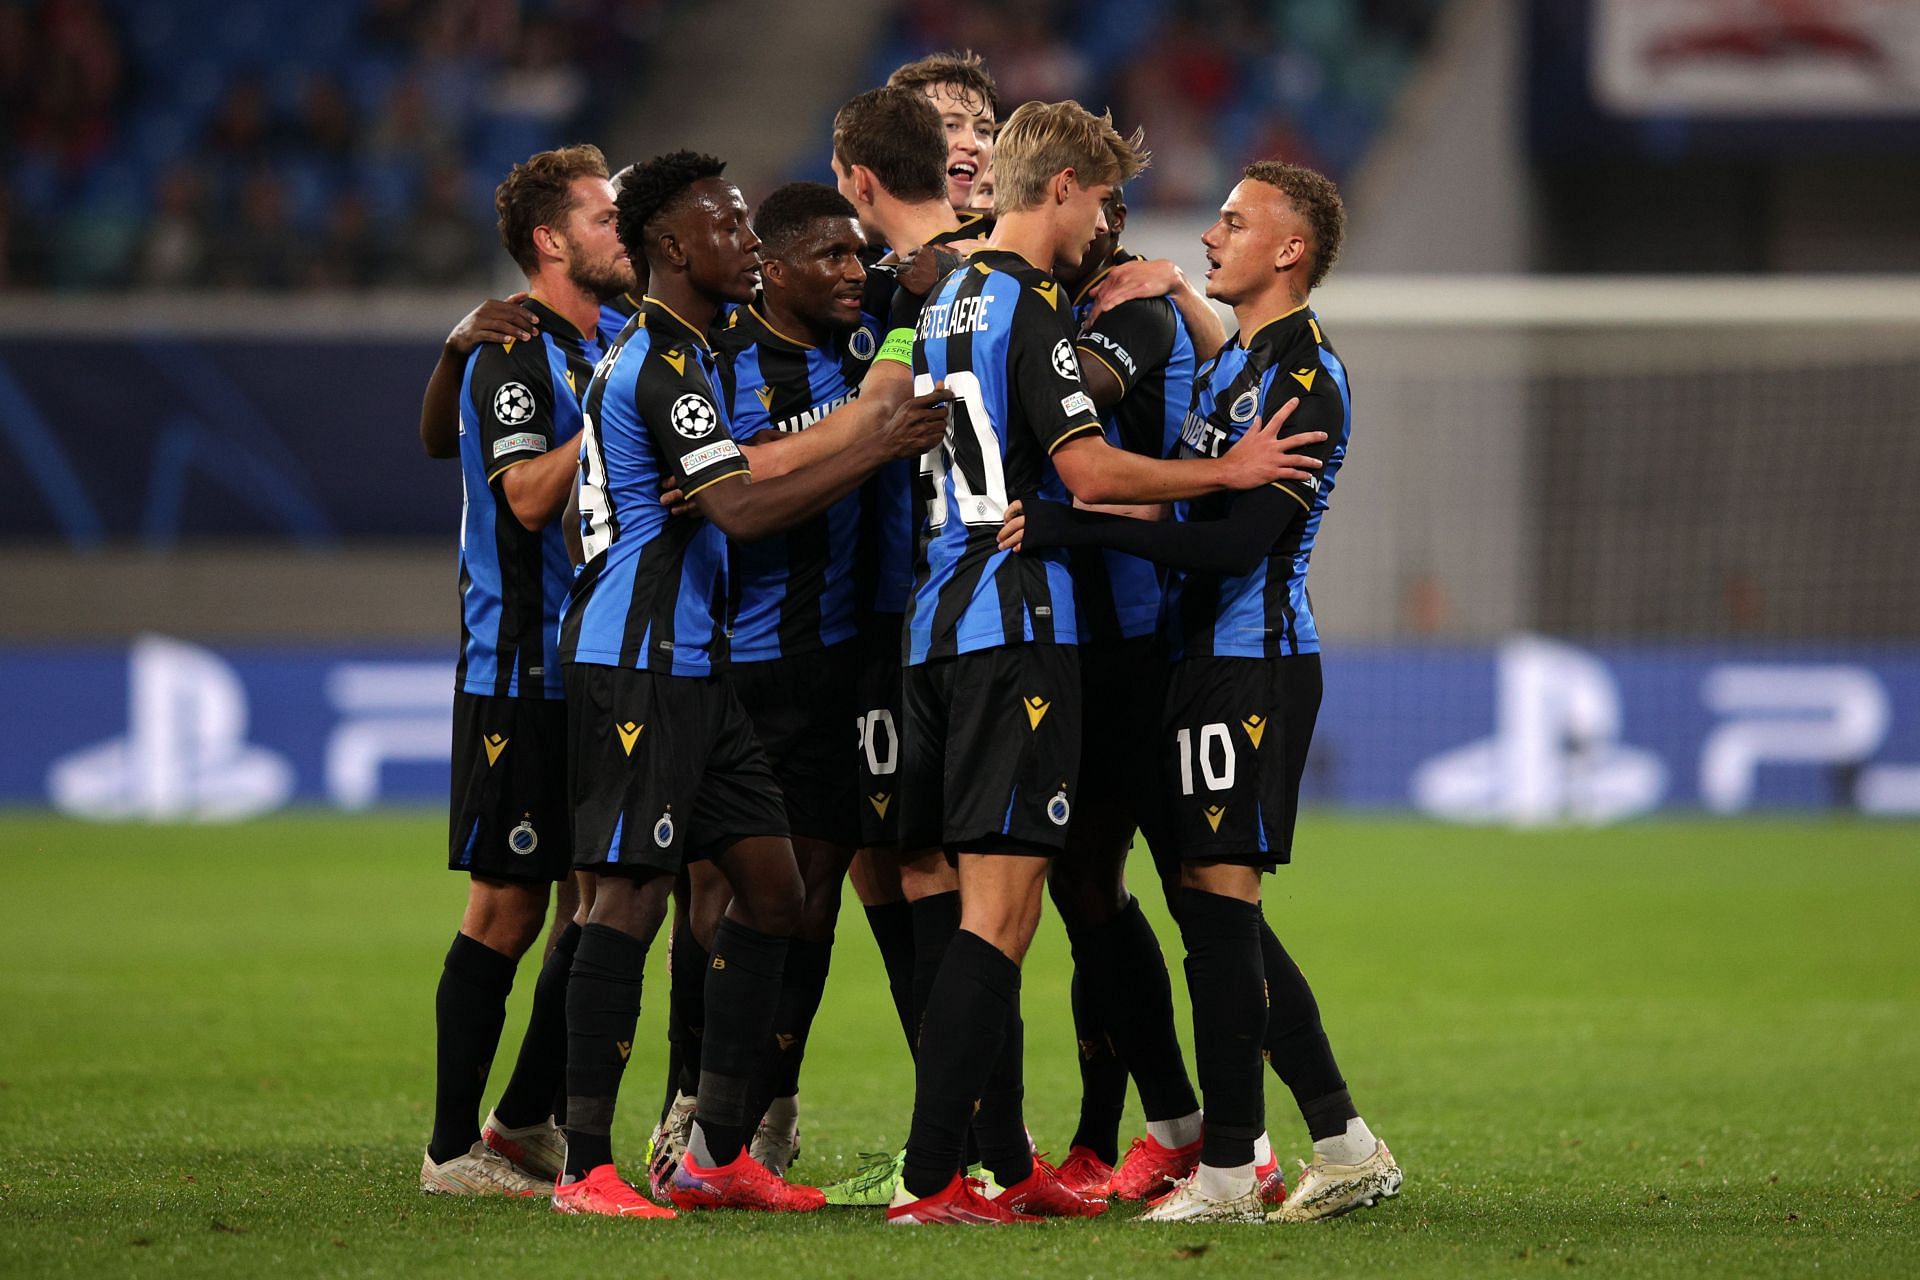 Club Brugge will face KV Oostende on Saturday